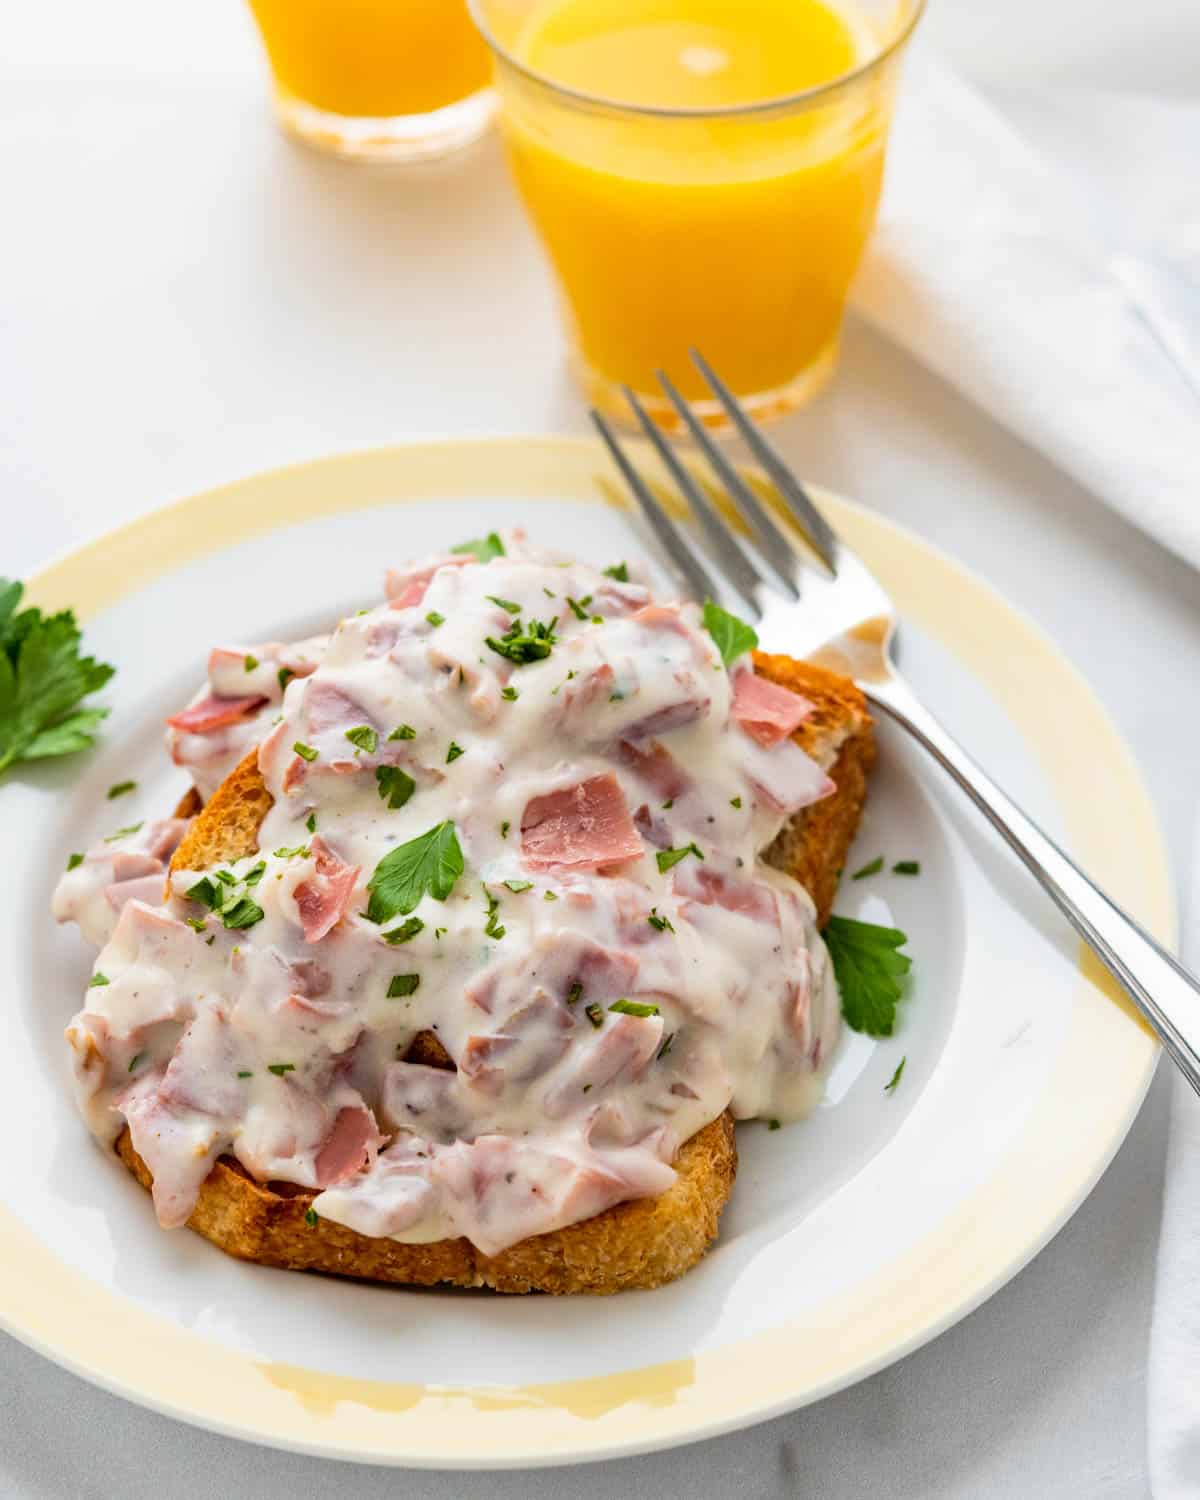 A plate of creamed chipped beef on a slice of toast with a glass of orange juice.